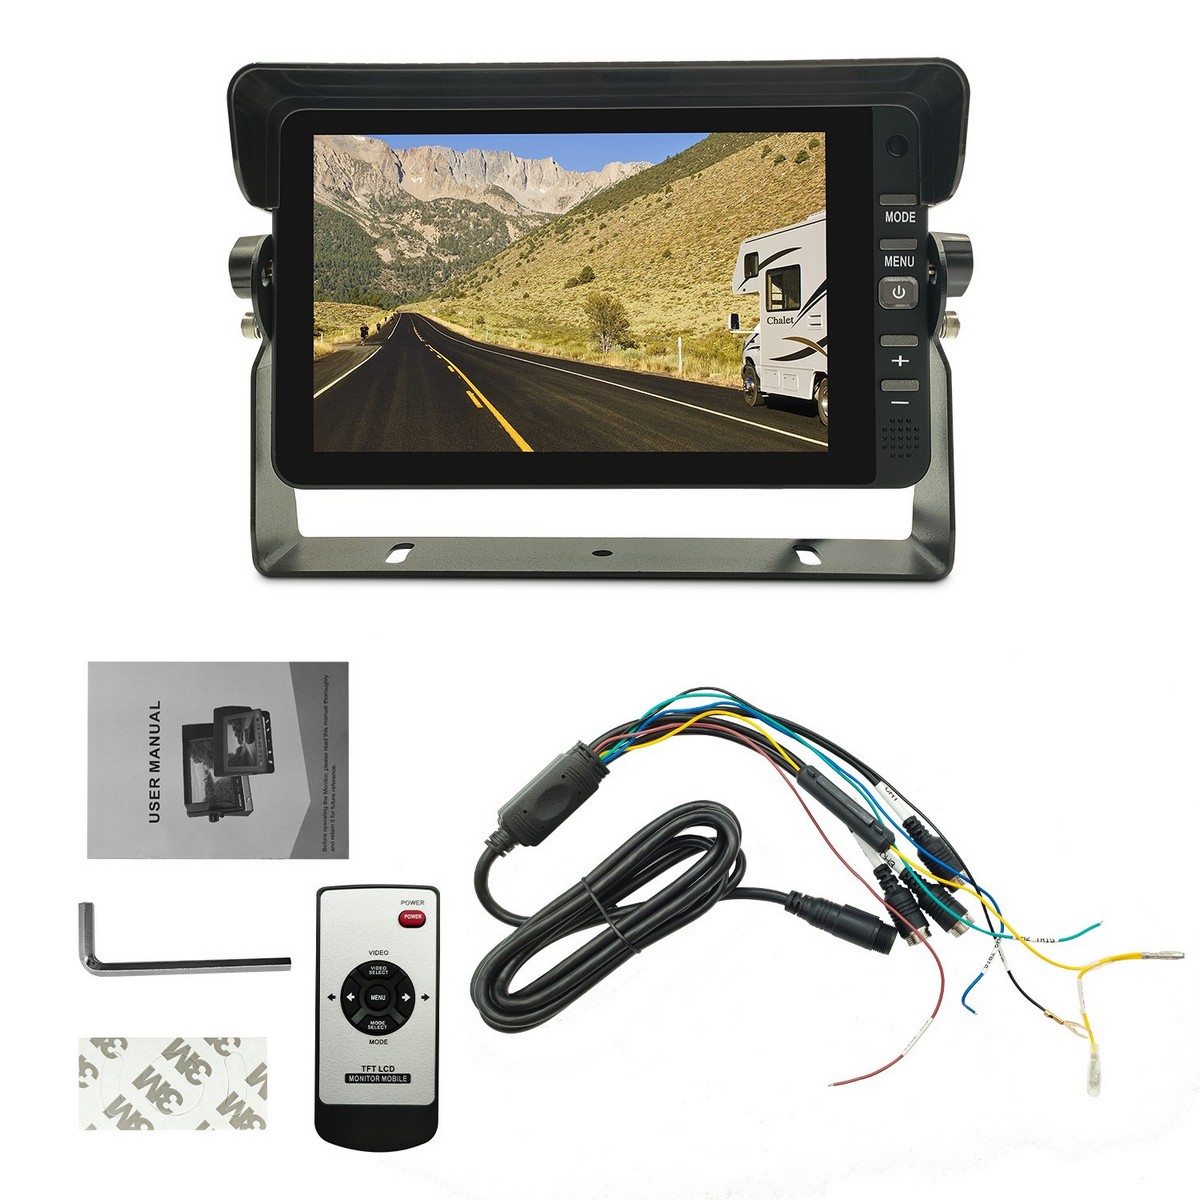 3 channel car monitor full hd resolution 7 inches